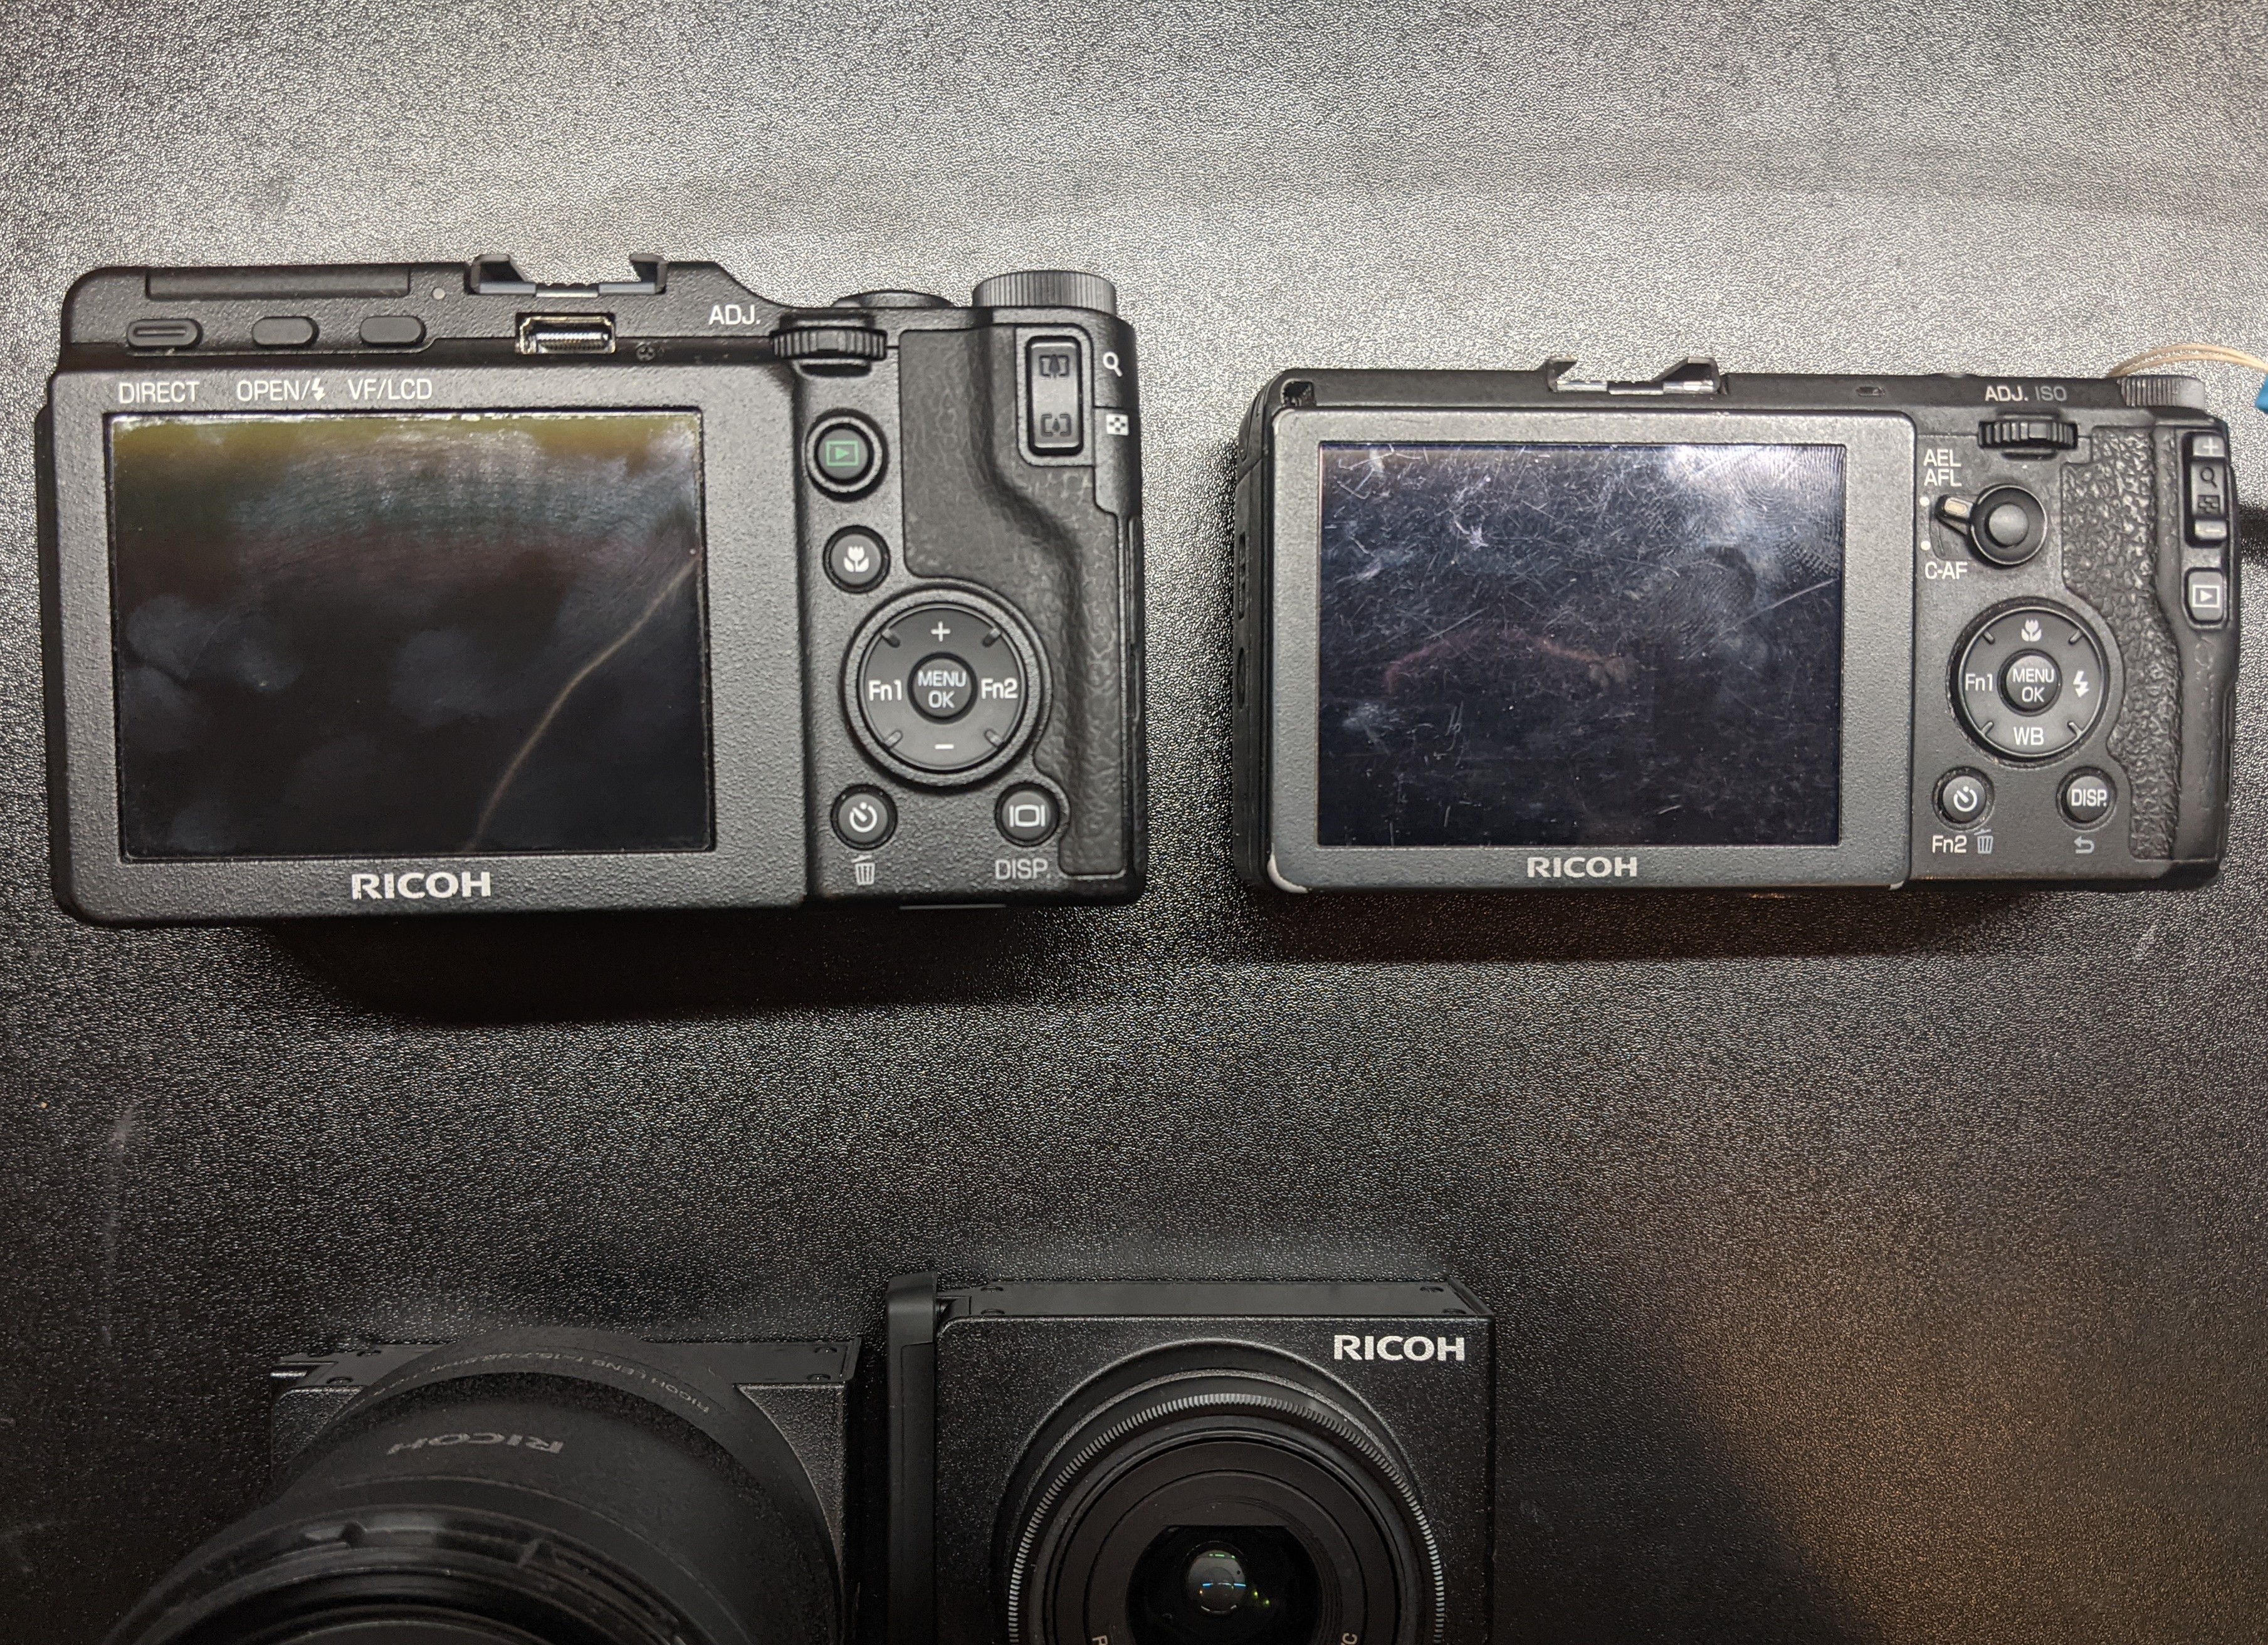 Ricoh GXR and Ricoh GR side-by-side